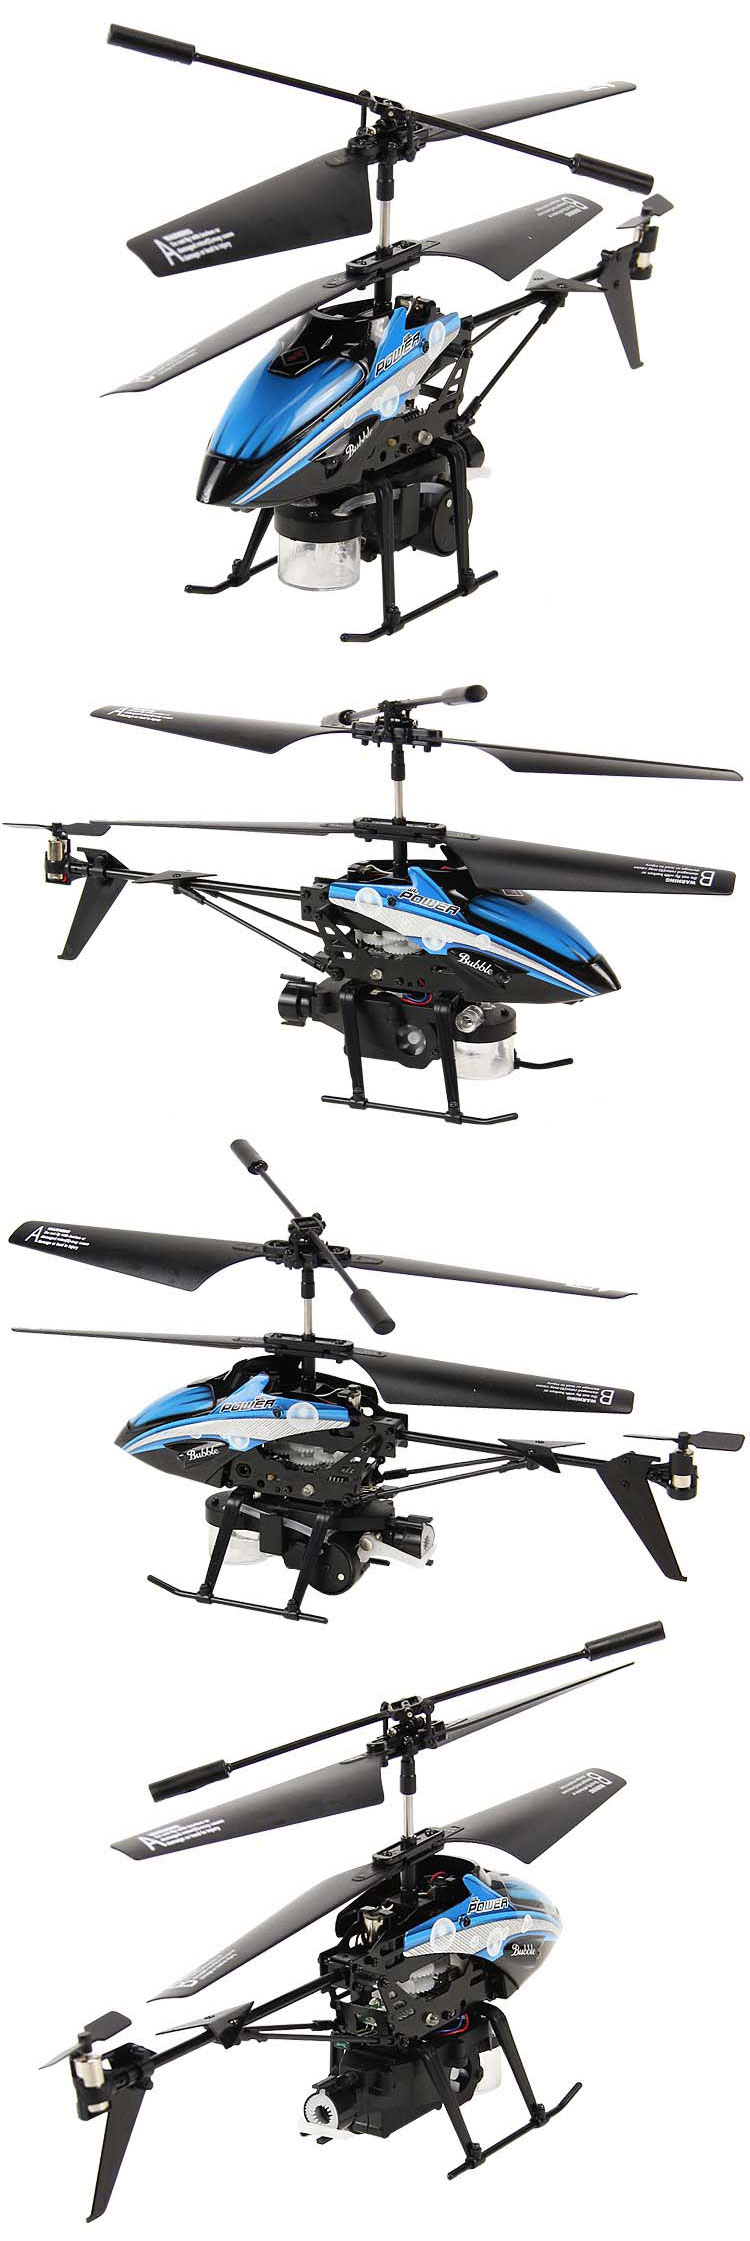 WL V757 Blow Bubbles RC Helicopter